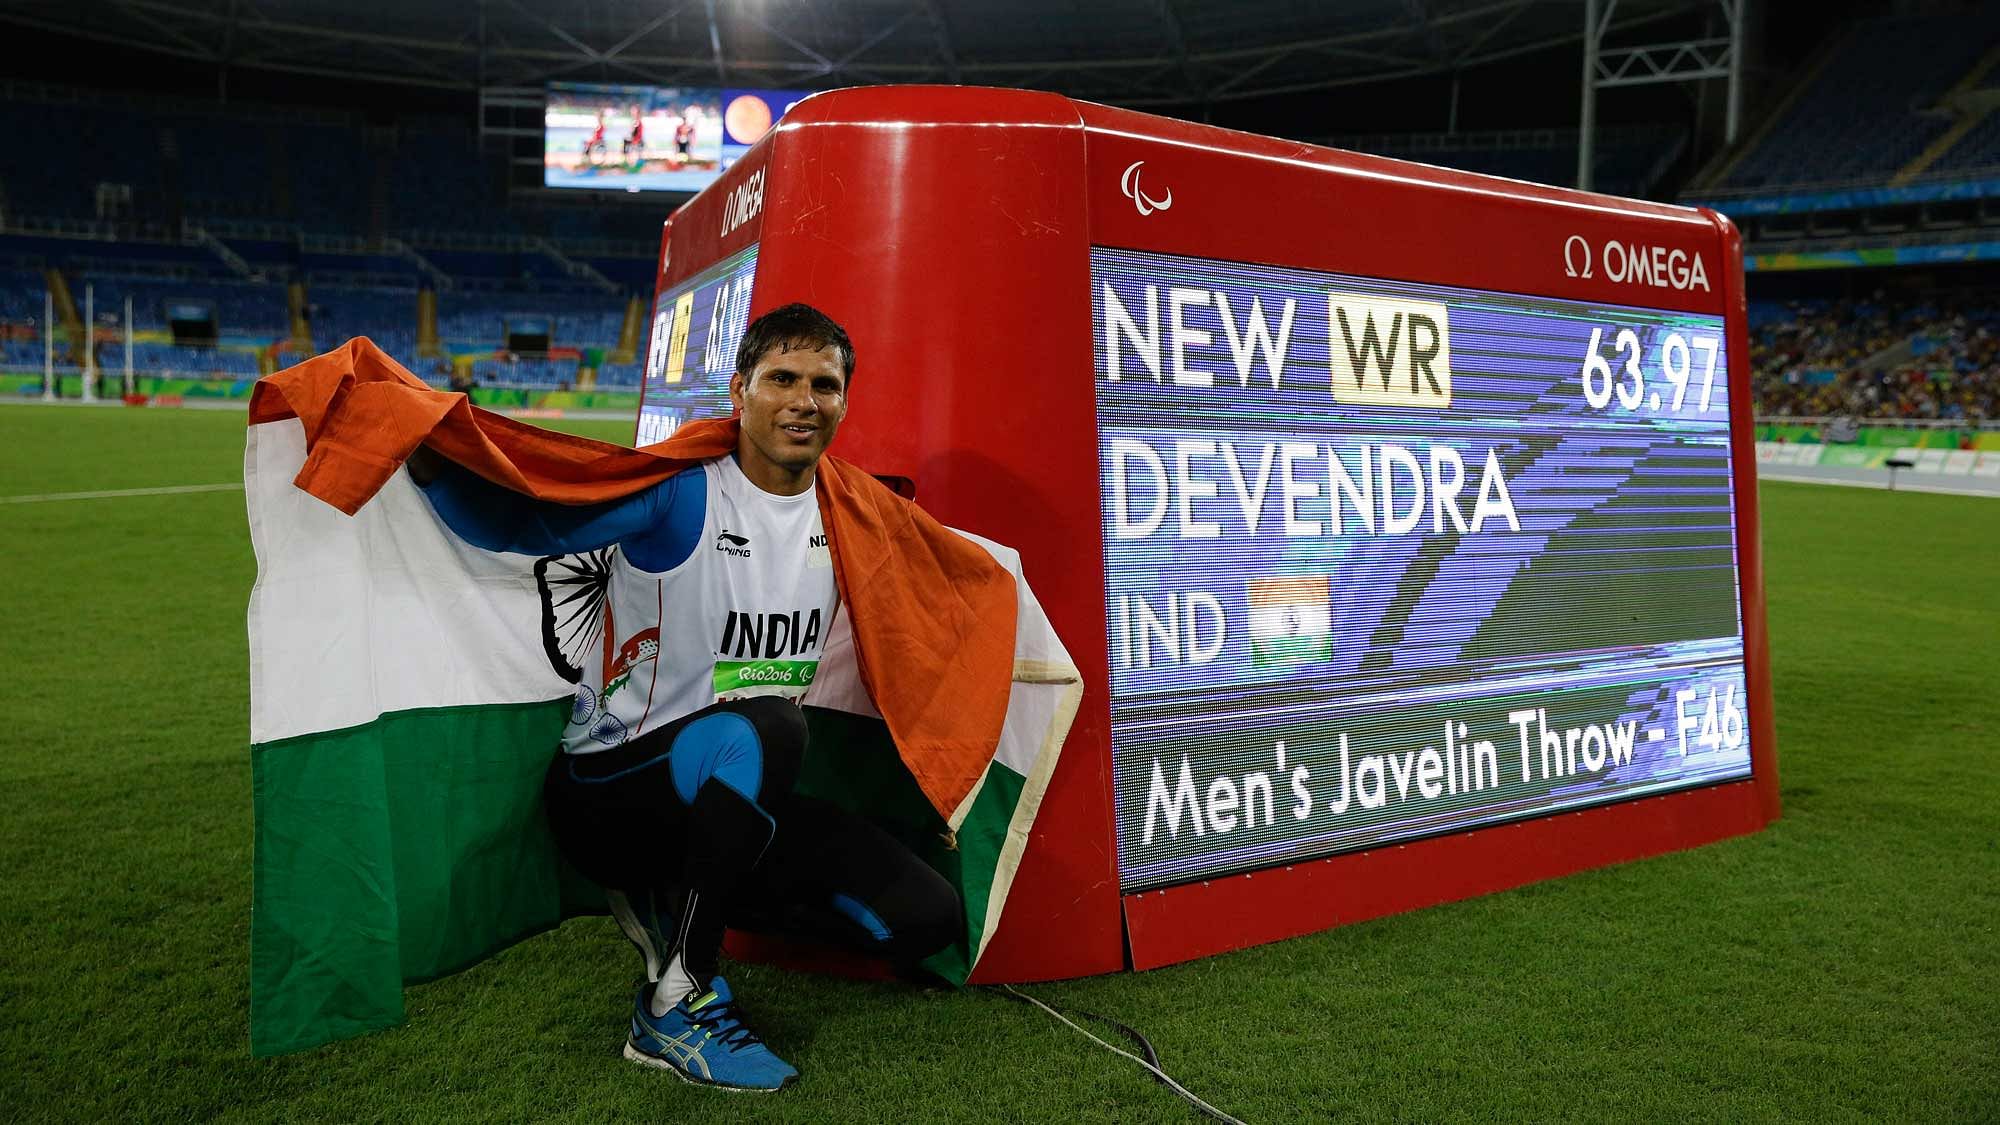 India’s Devendra Jhajharia poses for the pictures next to the scoreboard that shows his world record in the men’s javelin throw F46 athletics event at the Paralympic Games. (Photo: AP)<a></a>